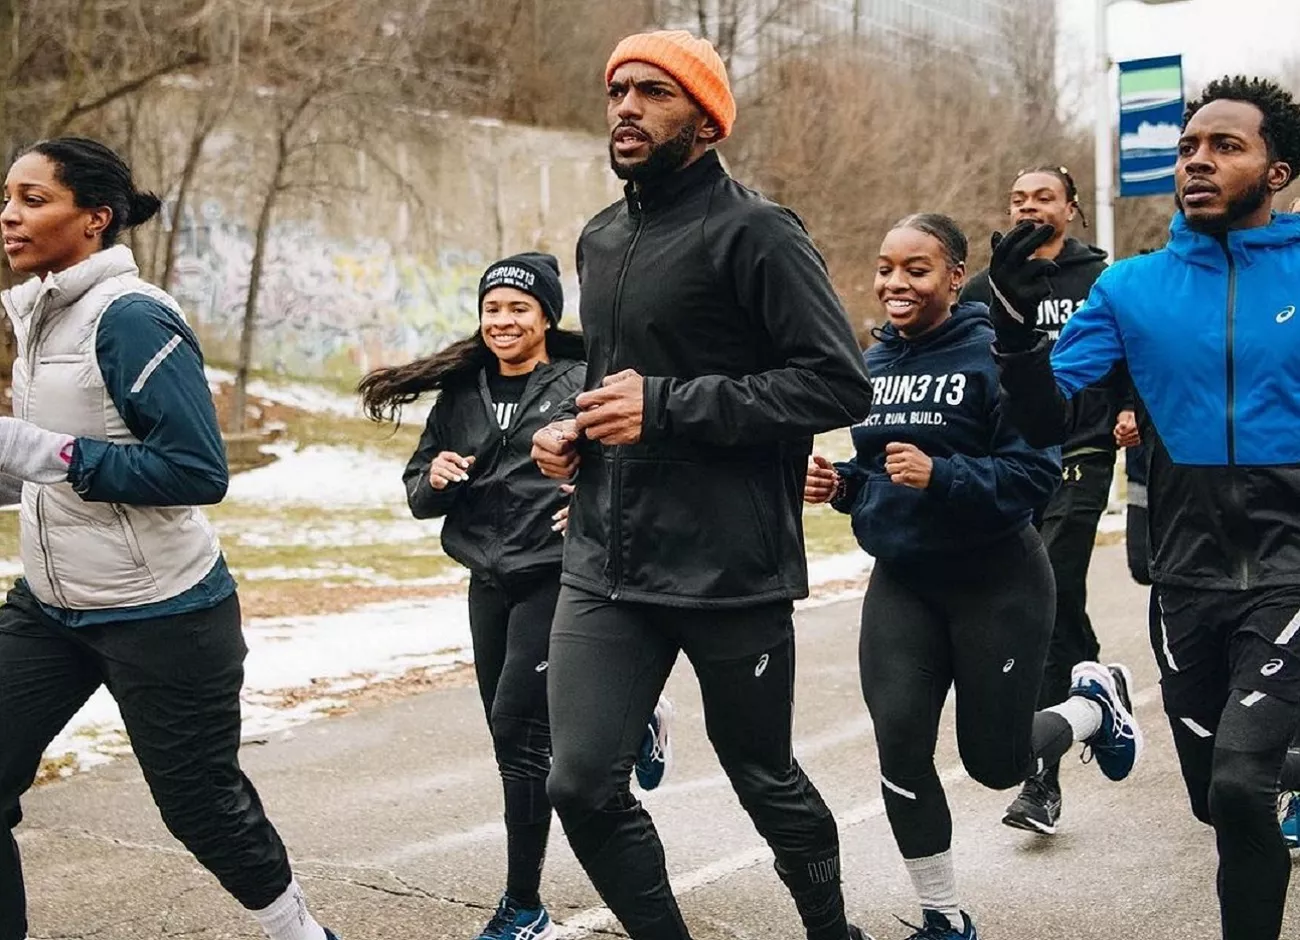 Experience Detroit While Out on a Run